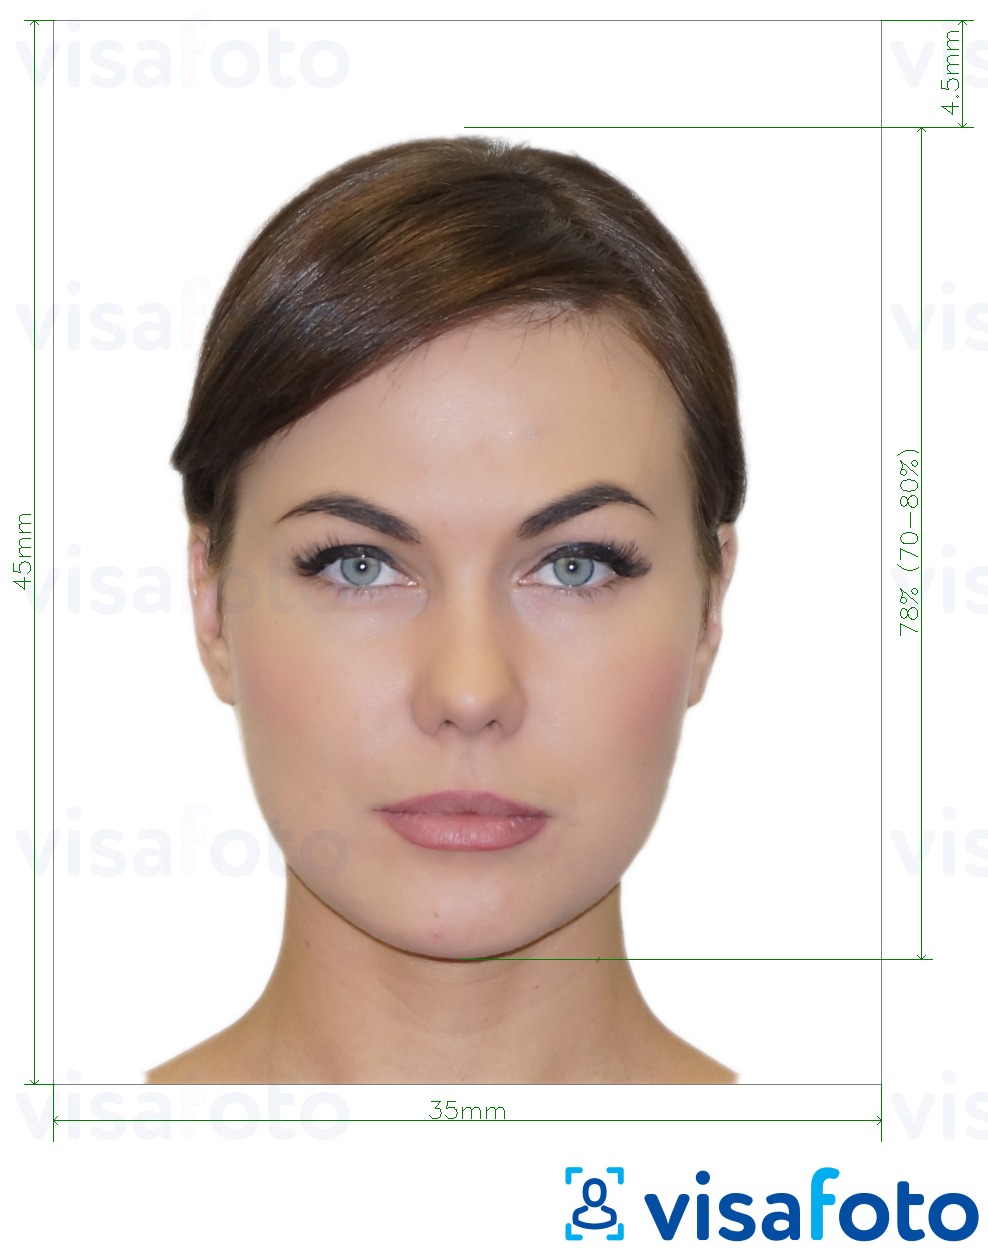 Example of photo for Russia internal Passport for Gosuslugi, 35x45 mm with exact size specification